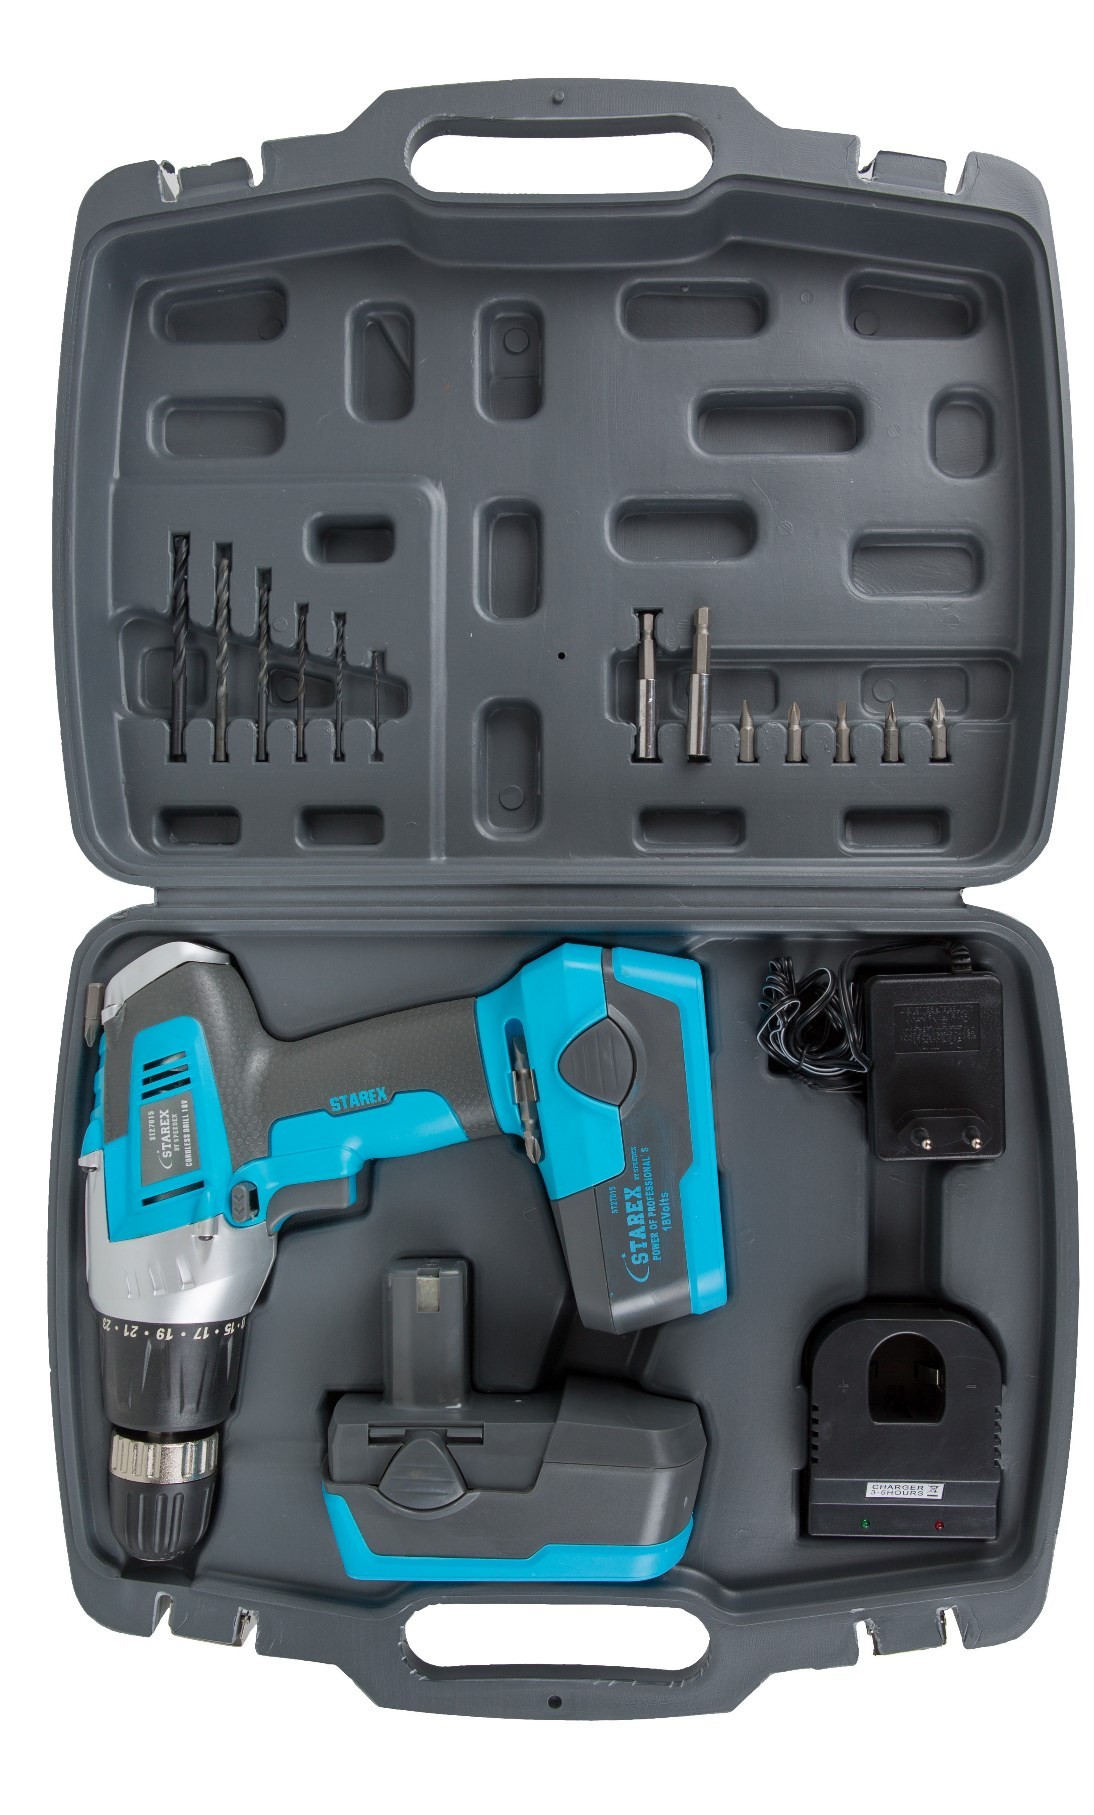 Starex cordless drill 18v with extra battery blue/grey body blow case st27015